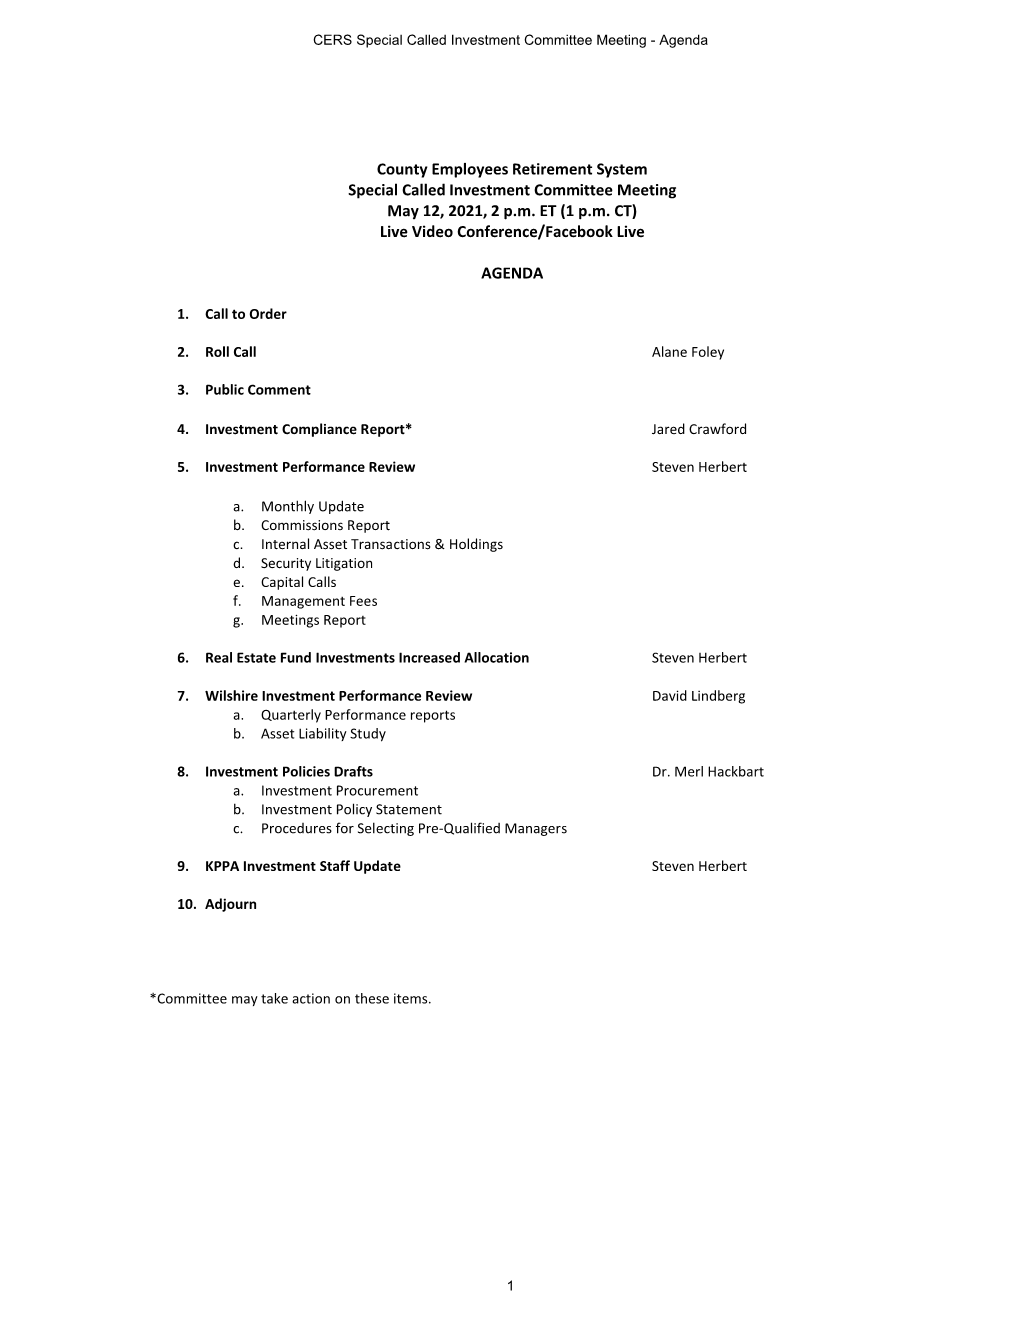 May 12 2021 CERS Investment Committee Meeting Materials.Pdf